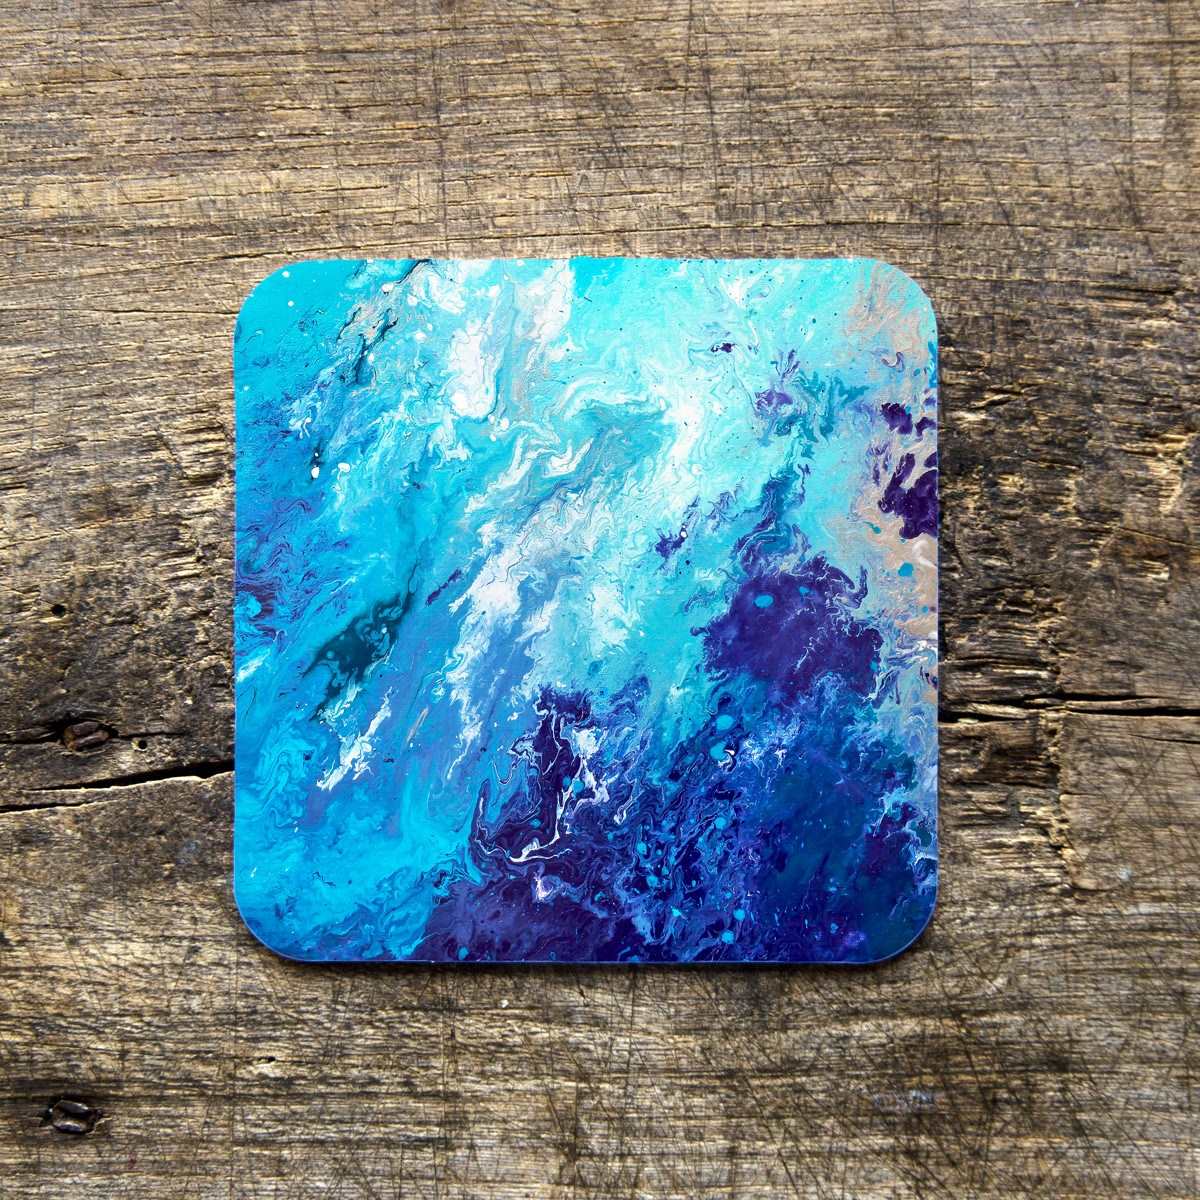 Blue & White Coasters - Louise Mead